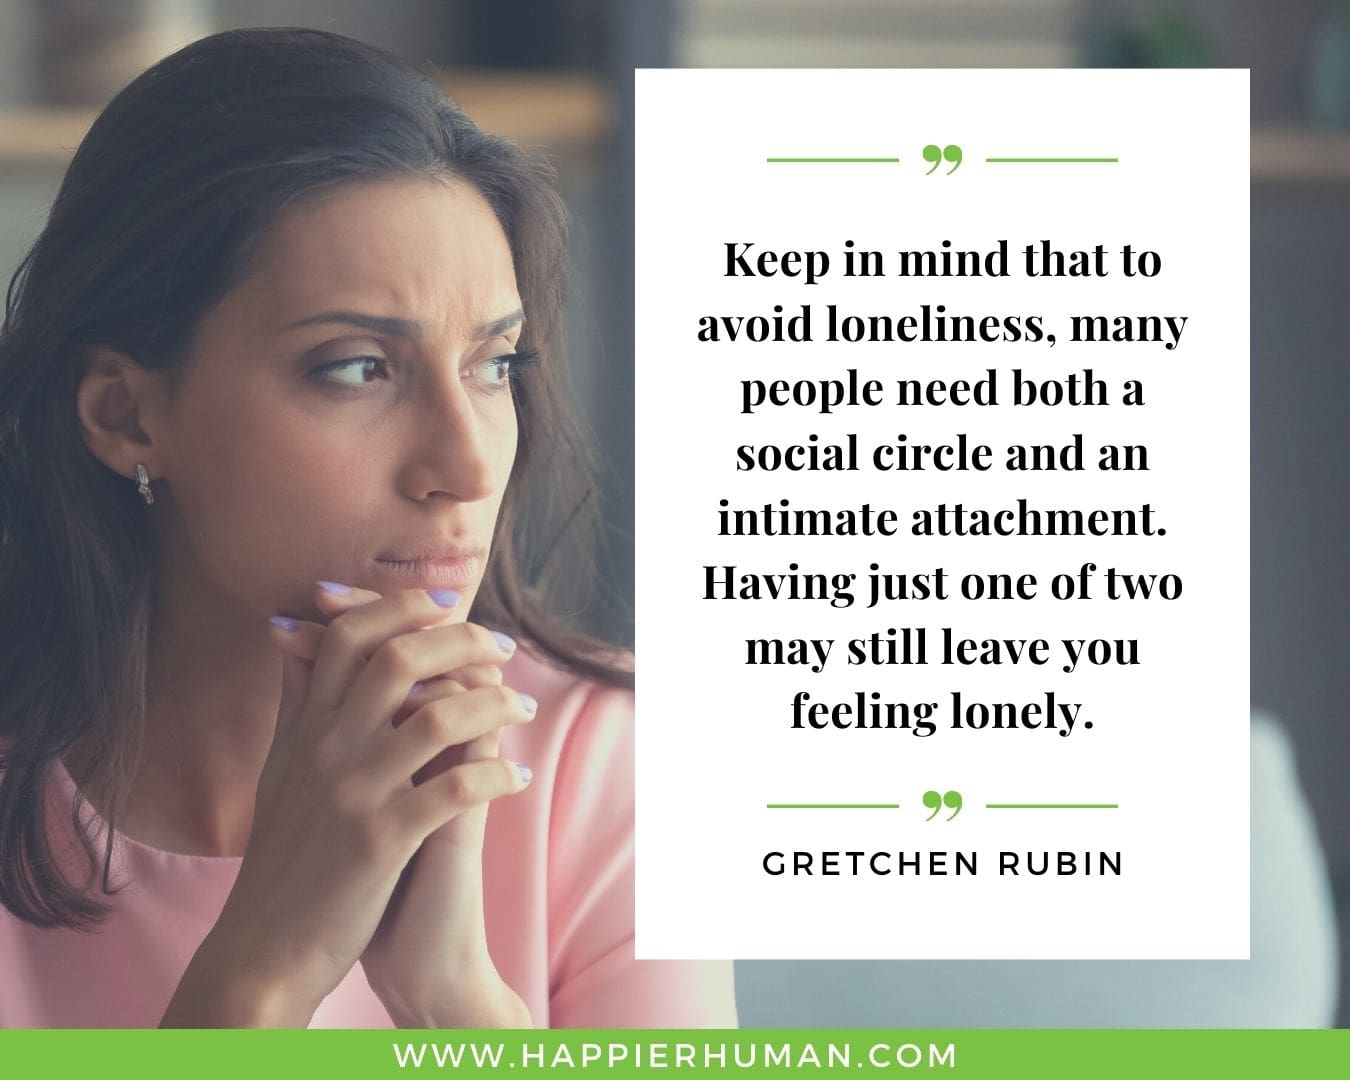 Loneliness Quotes - “Keep in mind that to avoid loneliness, many people need both a social circle and an intimate attachment. Having just one of two may still leave you feeling lonely.” – Gretchen Rubin